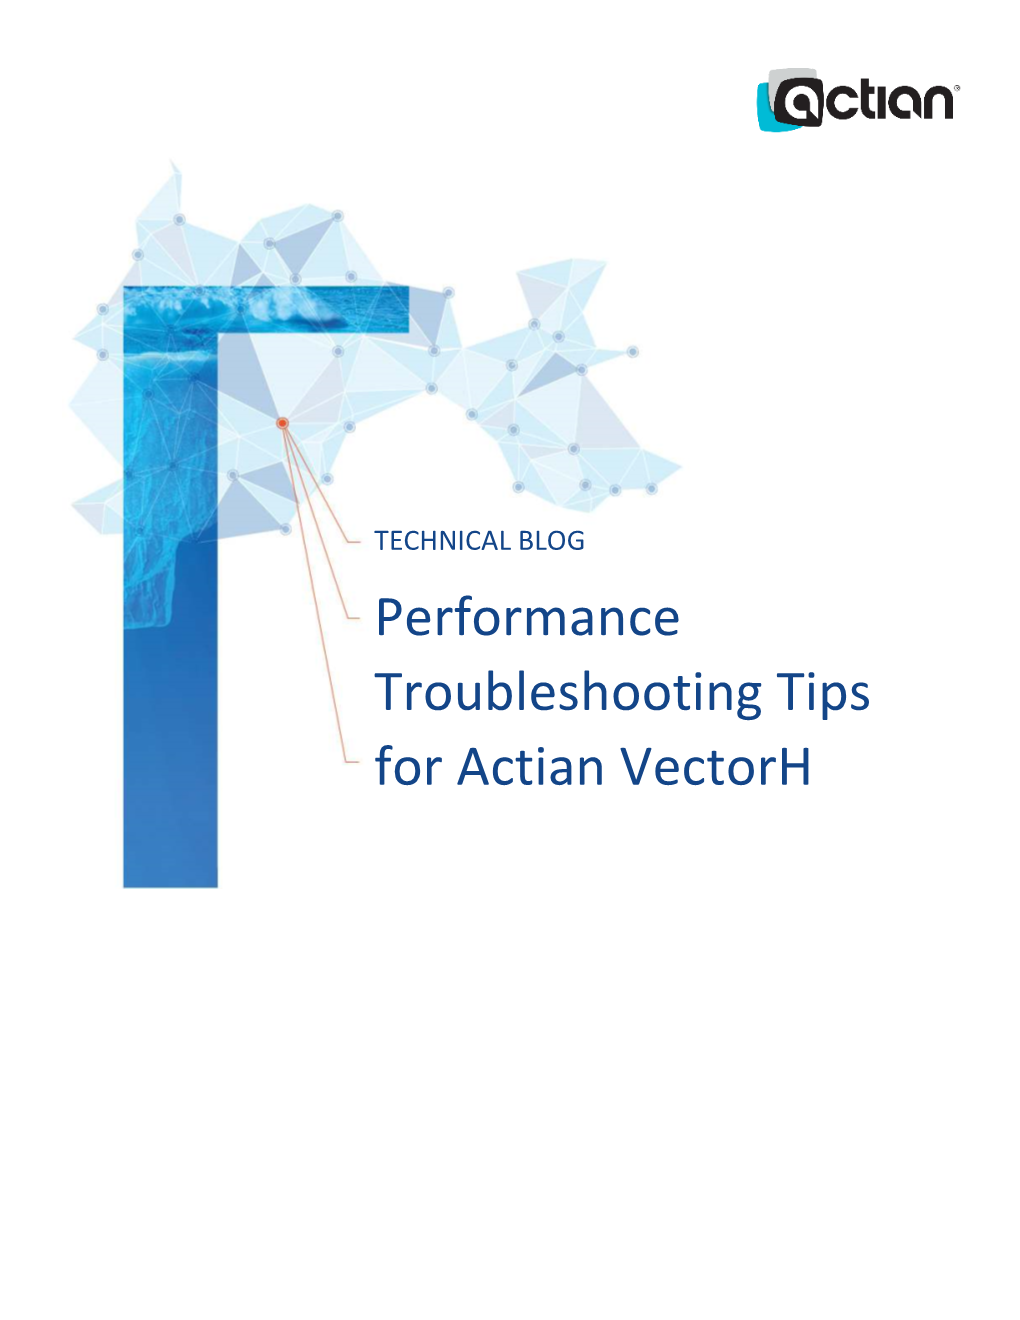 Performance Troubleshooting Tips for Actian Vectorh